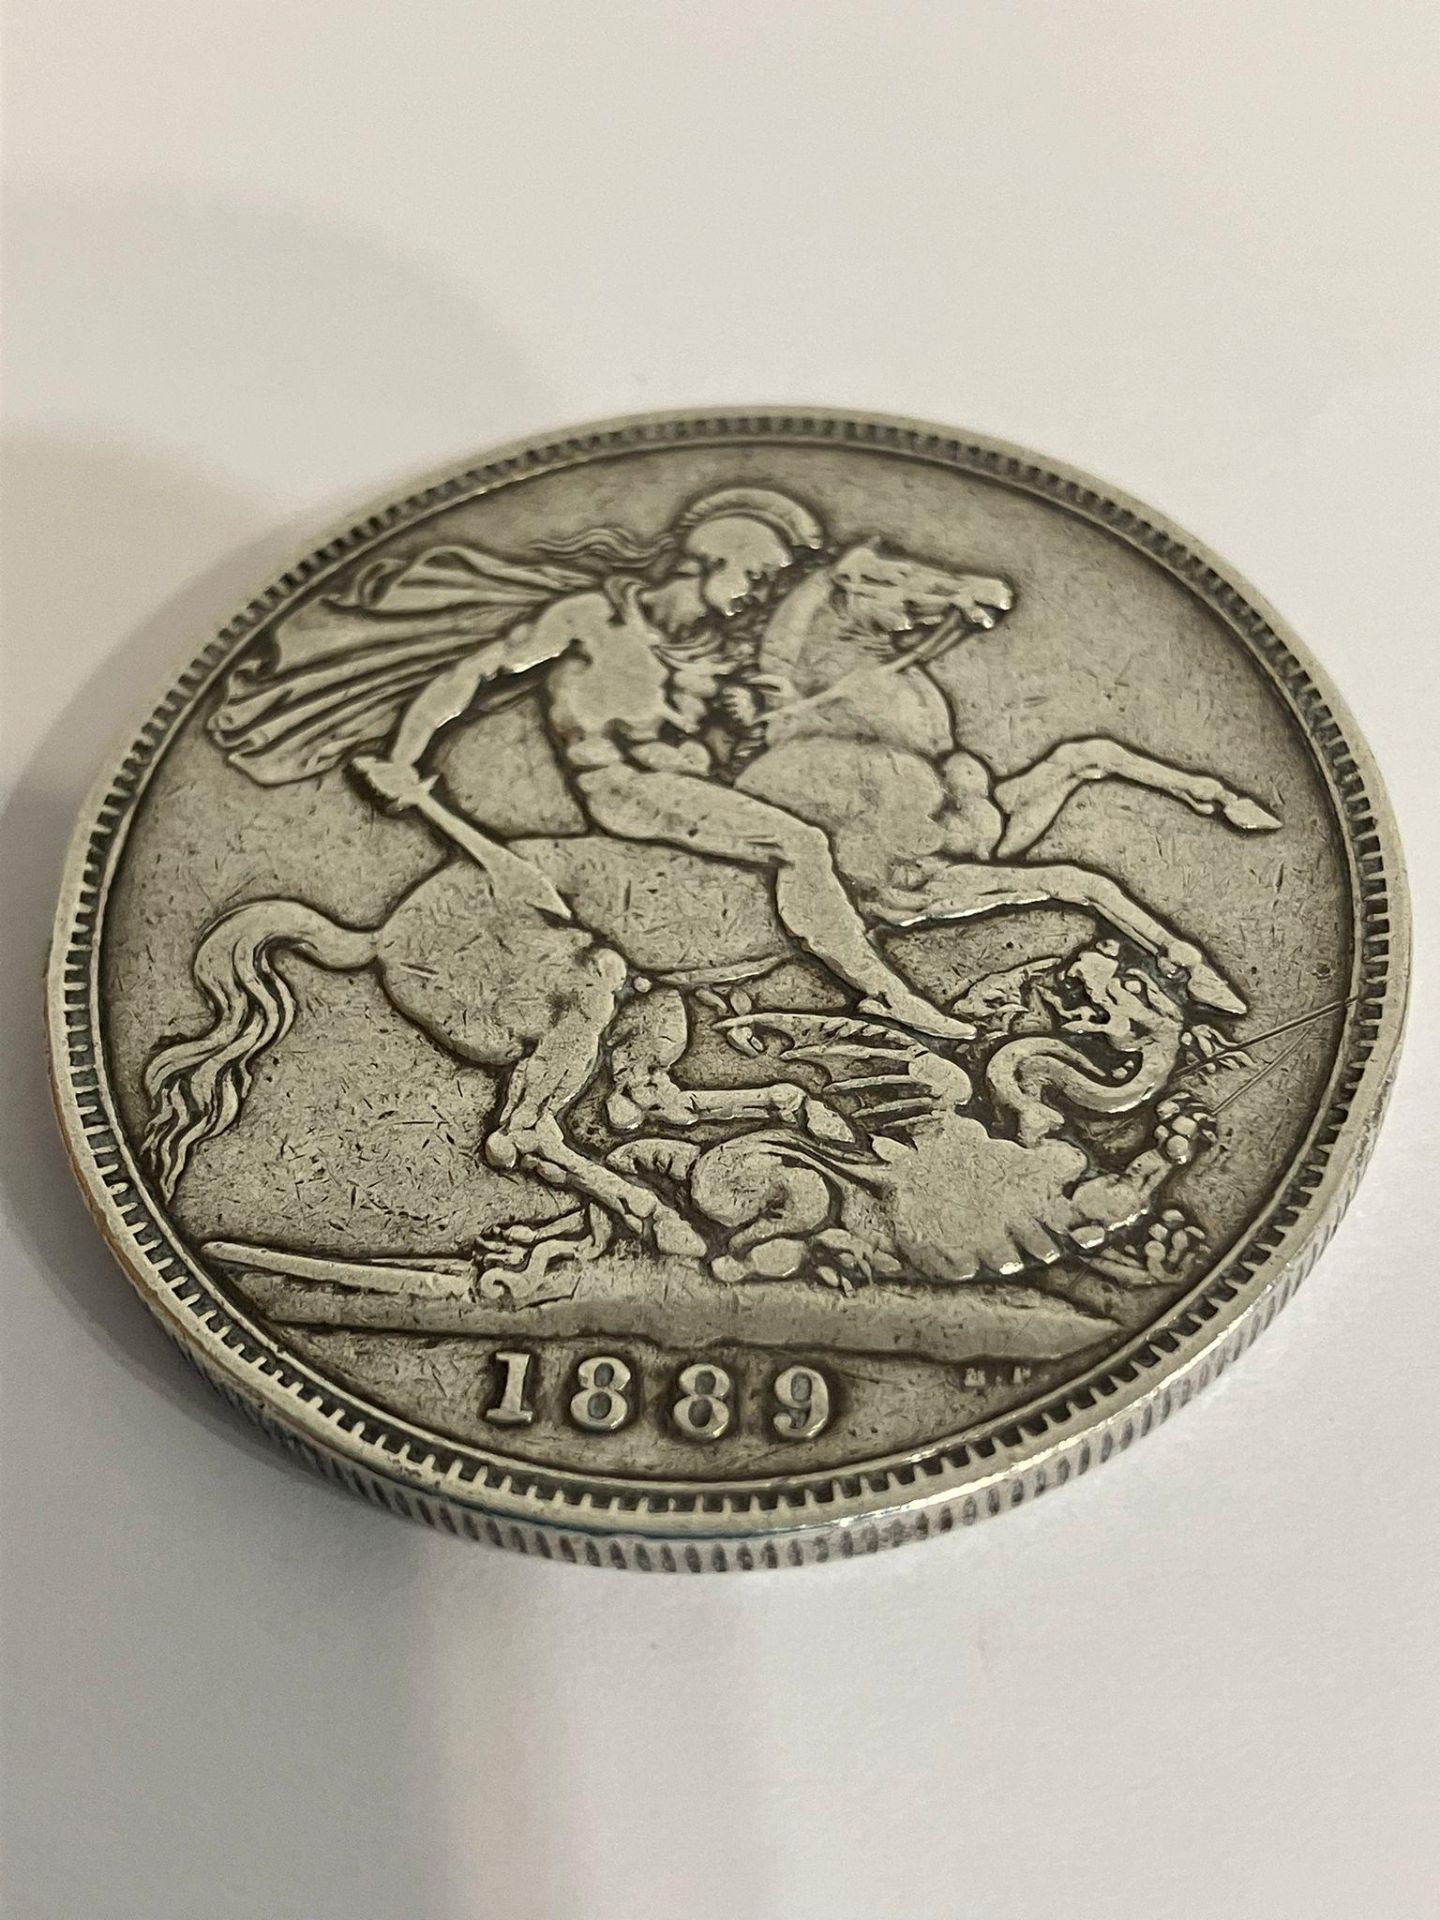 1889 SILVER CROWN in Very fine/extra fine condition. Having Bold raised definition to both sides.